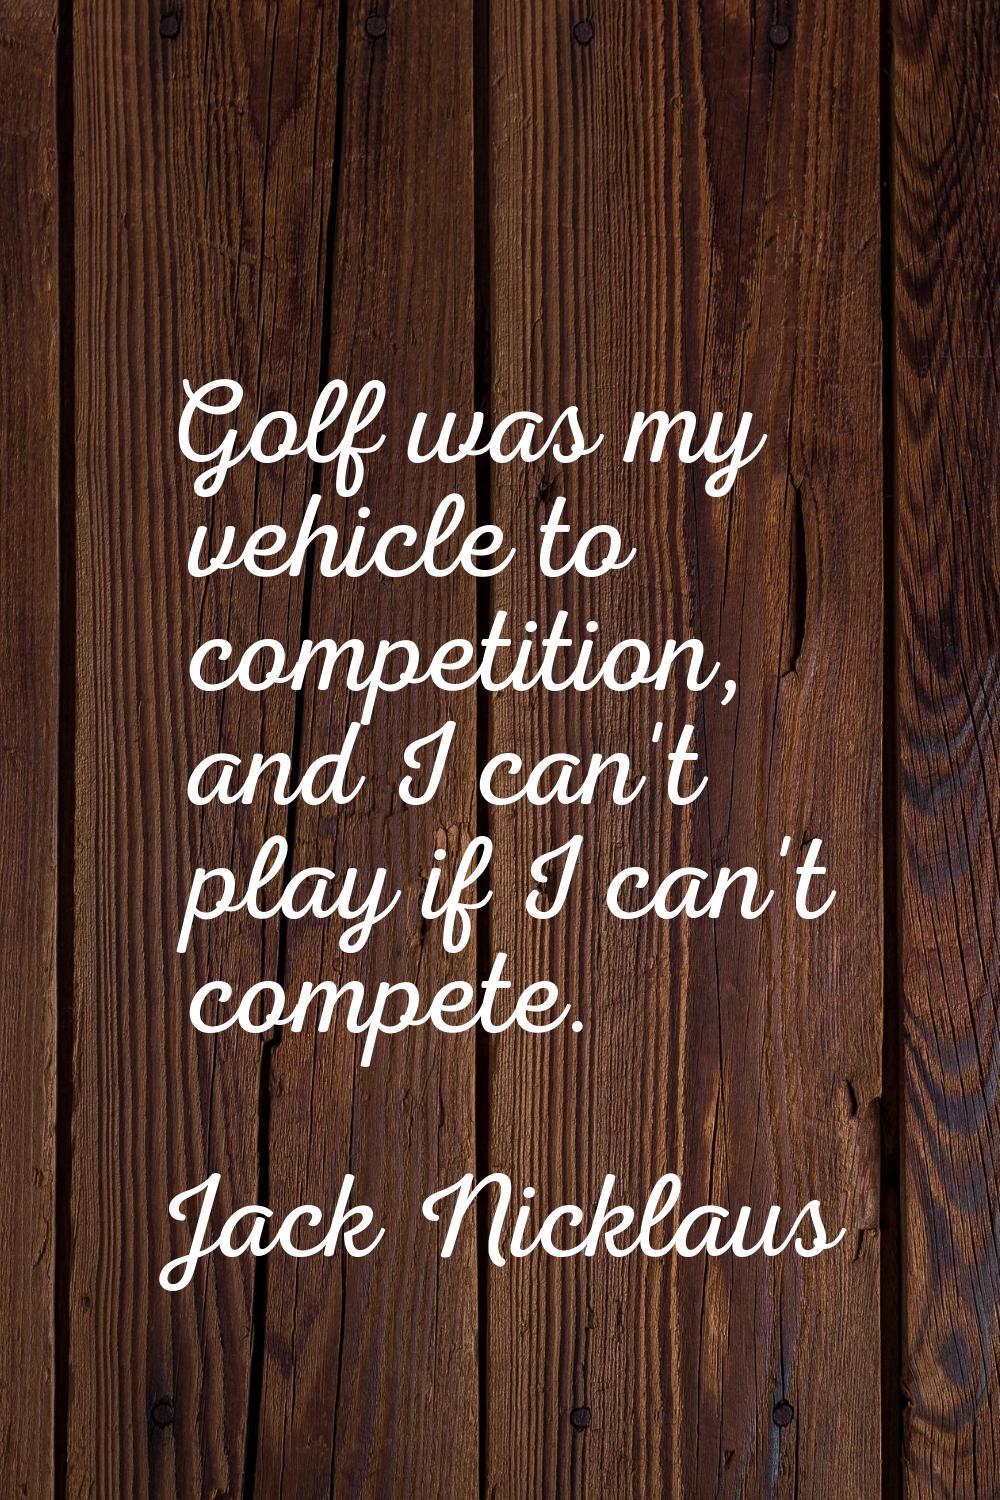 Golf was my vehicle to competition, and I can't play if I can't compete.